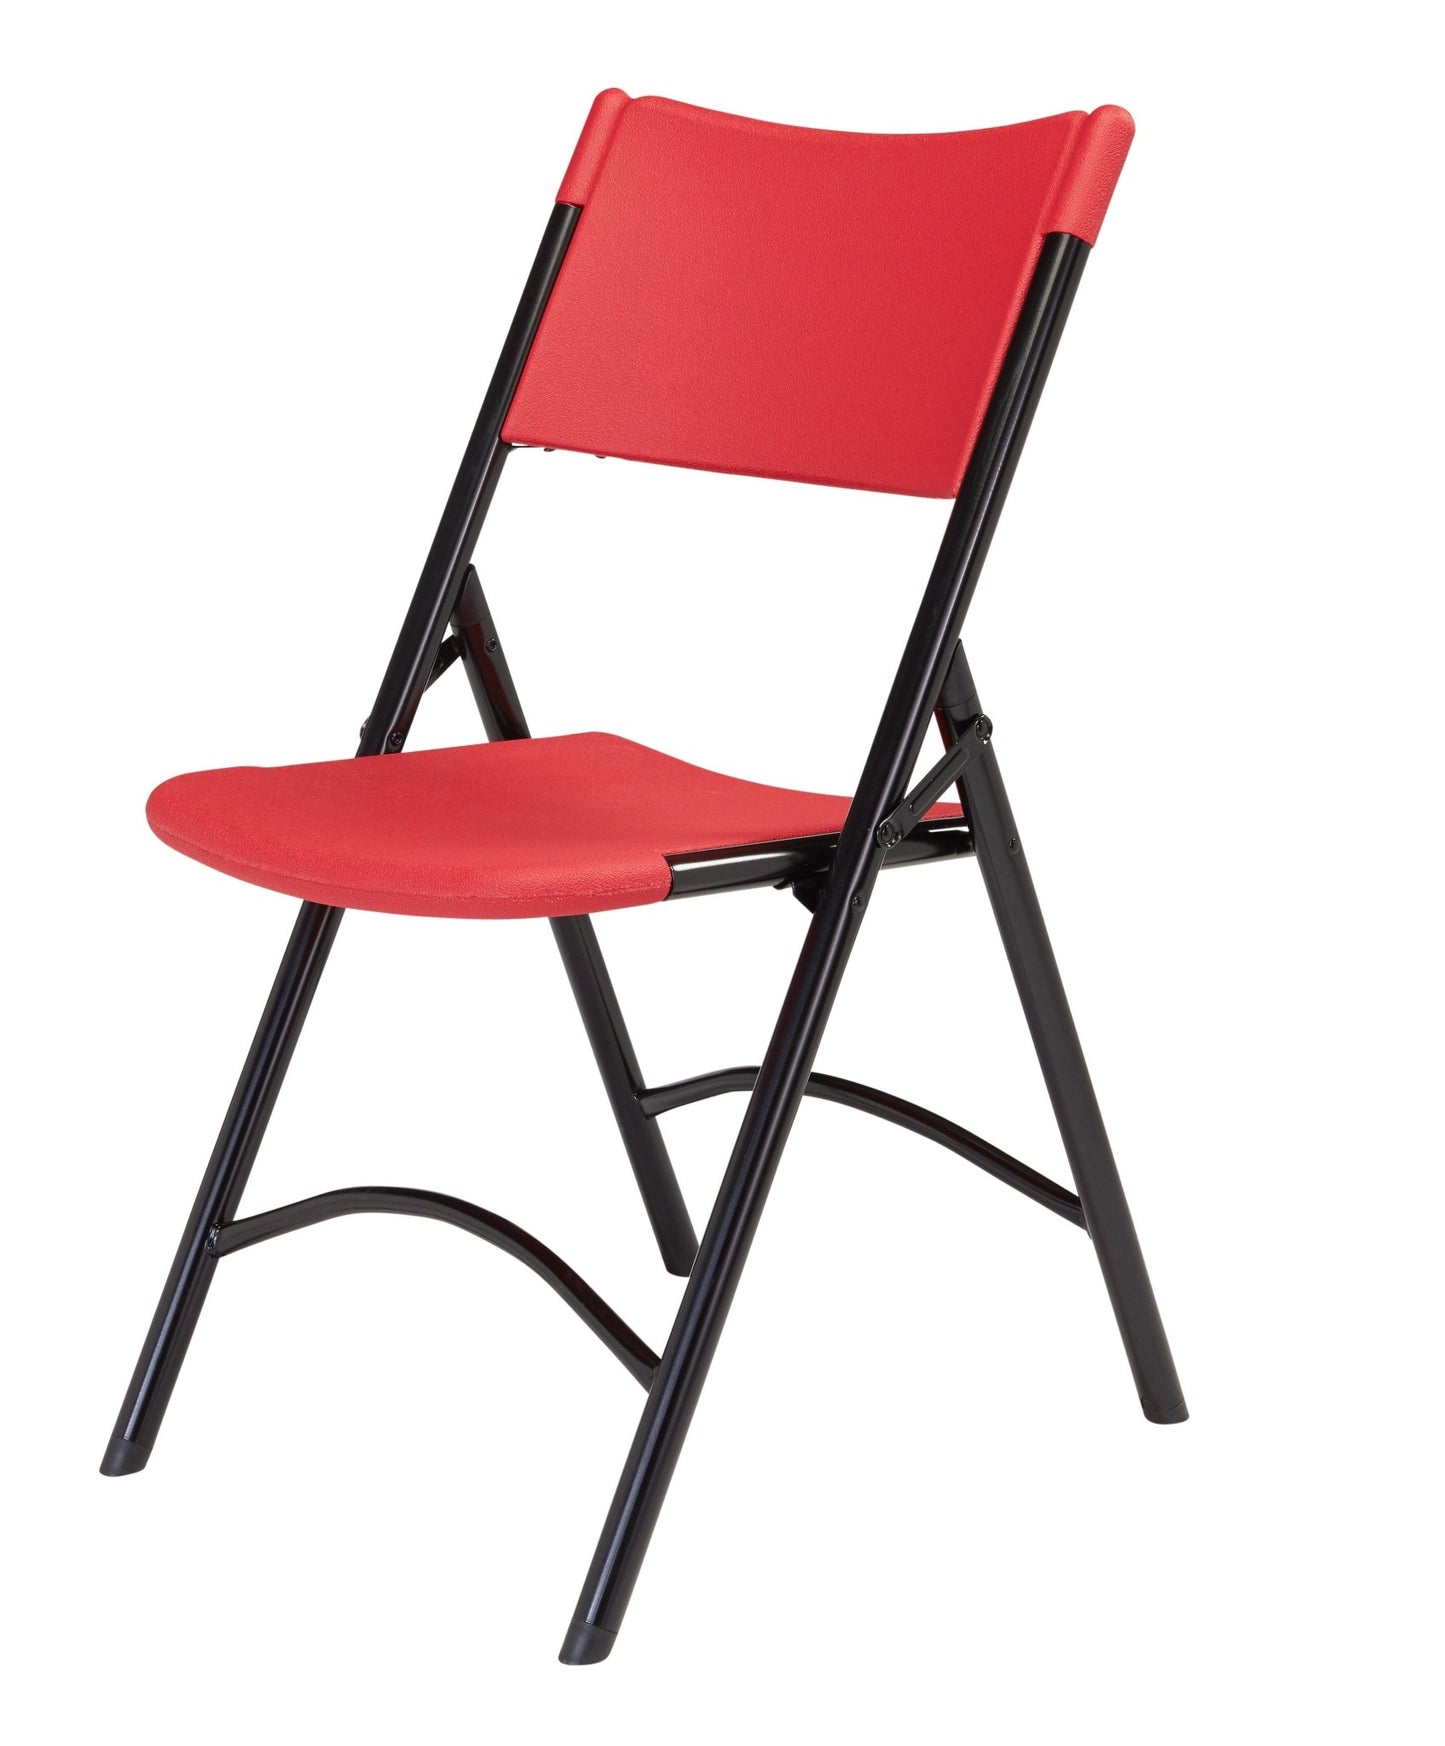 NPS 600 Series Blow Molded Heavy Duty Plastic Folding Chair (National Public Seating NPS-600) - SchoolOutlet